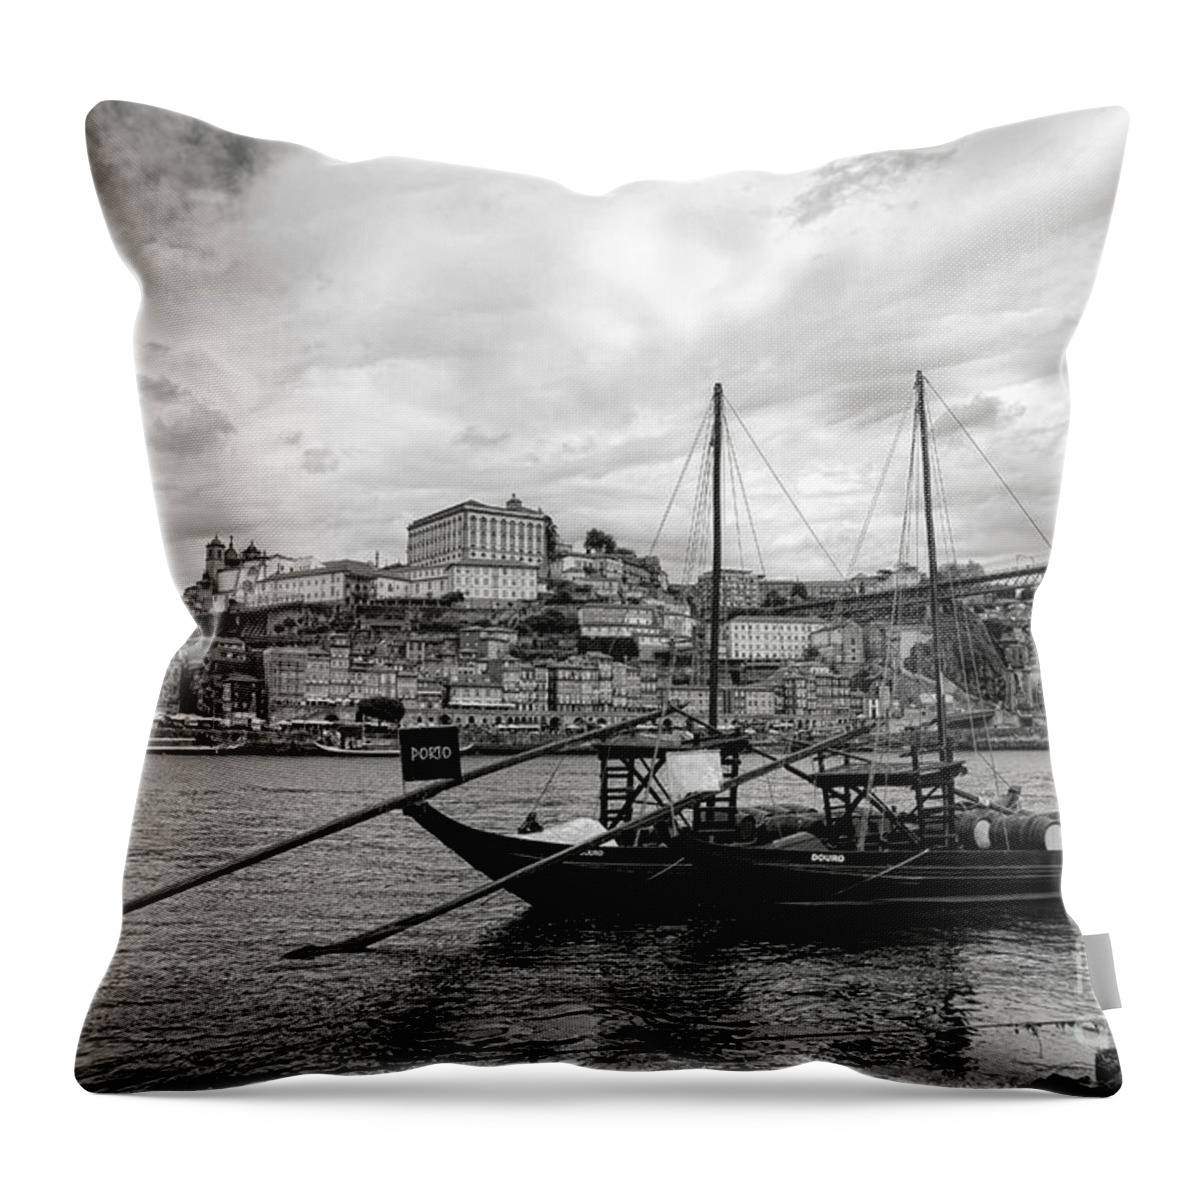 Porto Throw Pillow featuring the photograph Rabelo Boats in Porto by Olivier Le Queinec